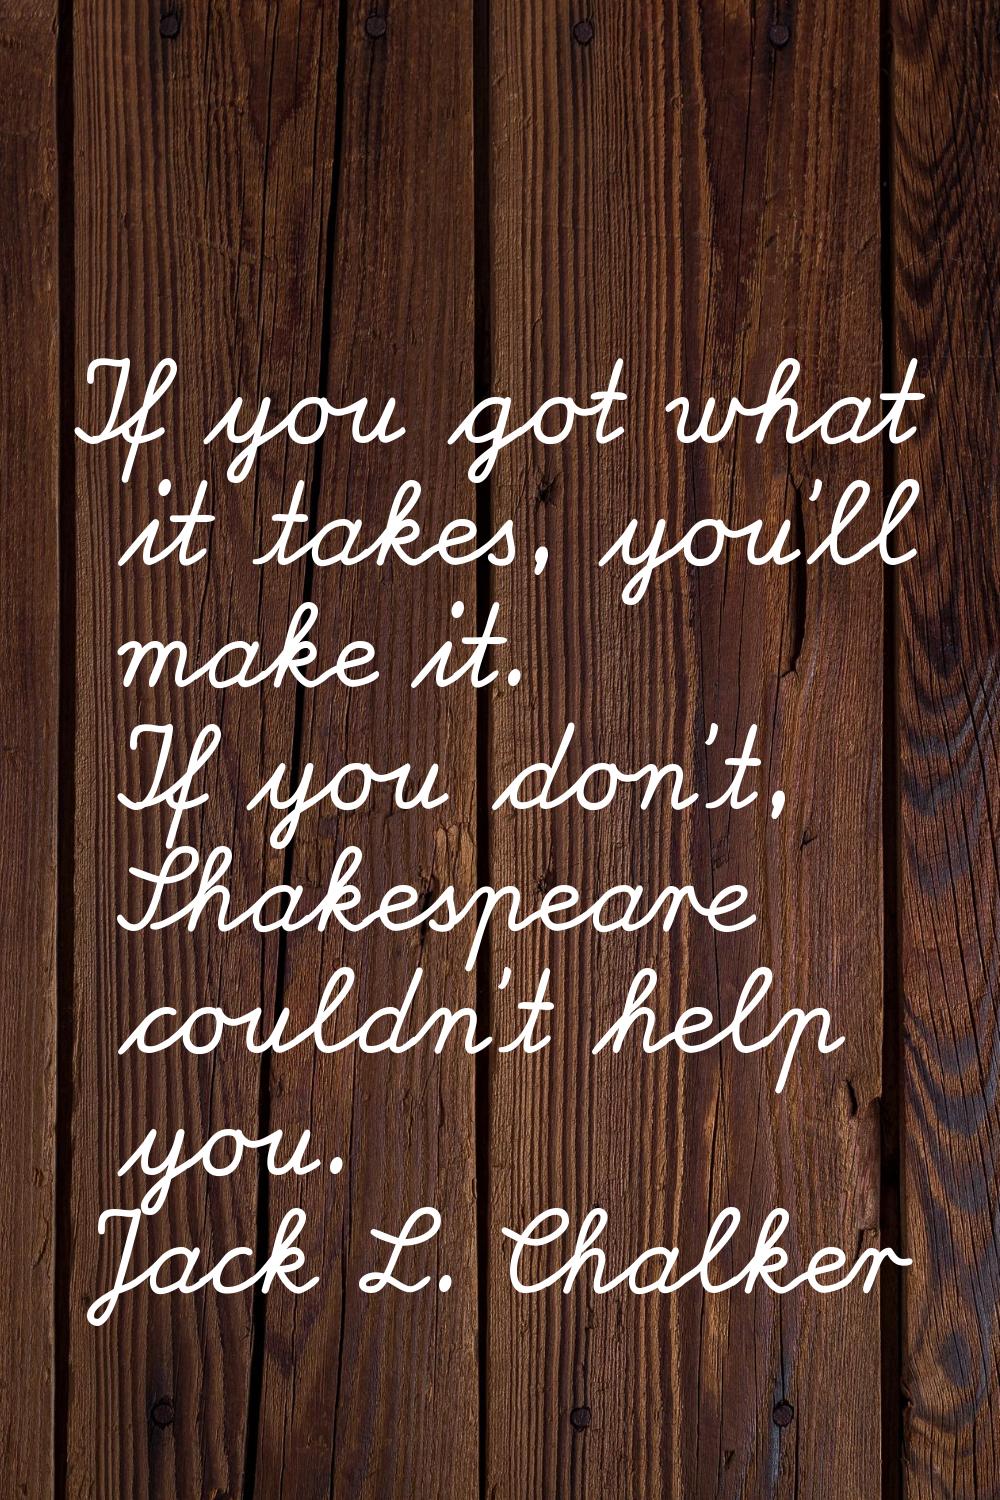 If you got what it takes, you'll make it. If you don't, Shakespeare couldn't help you.